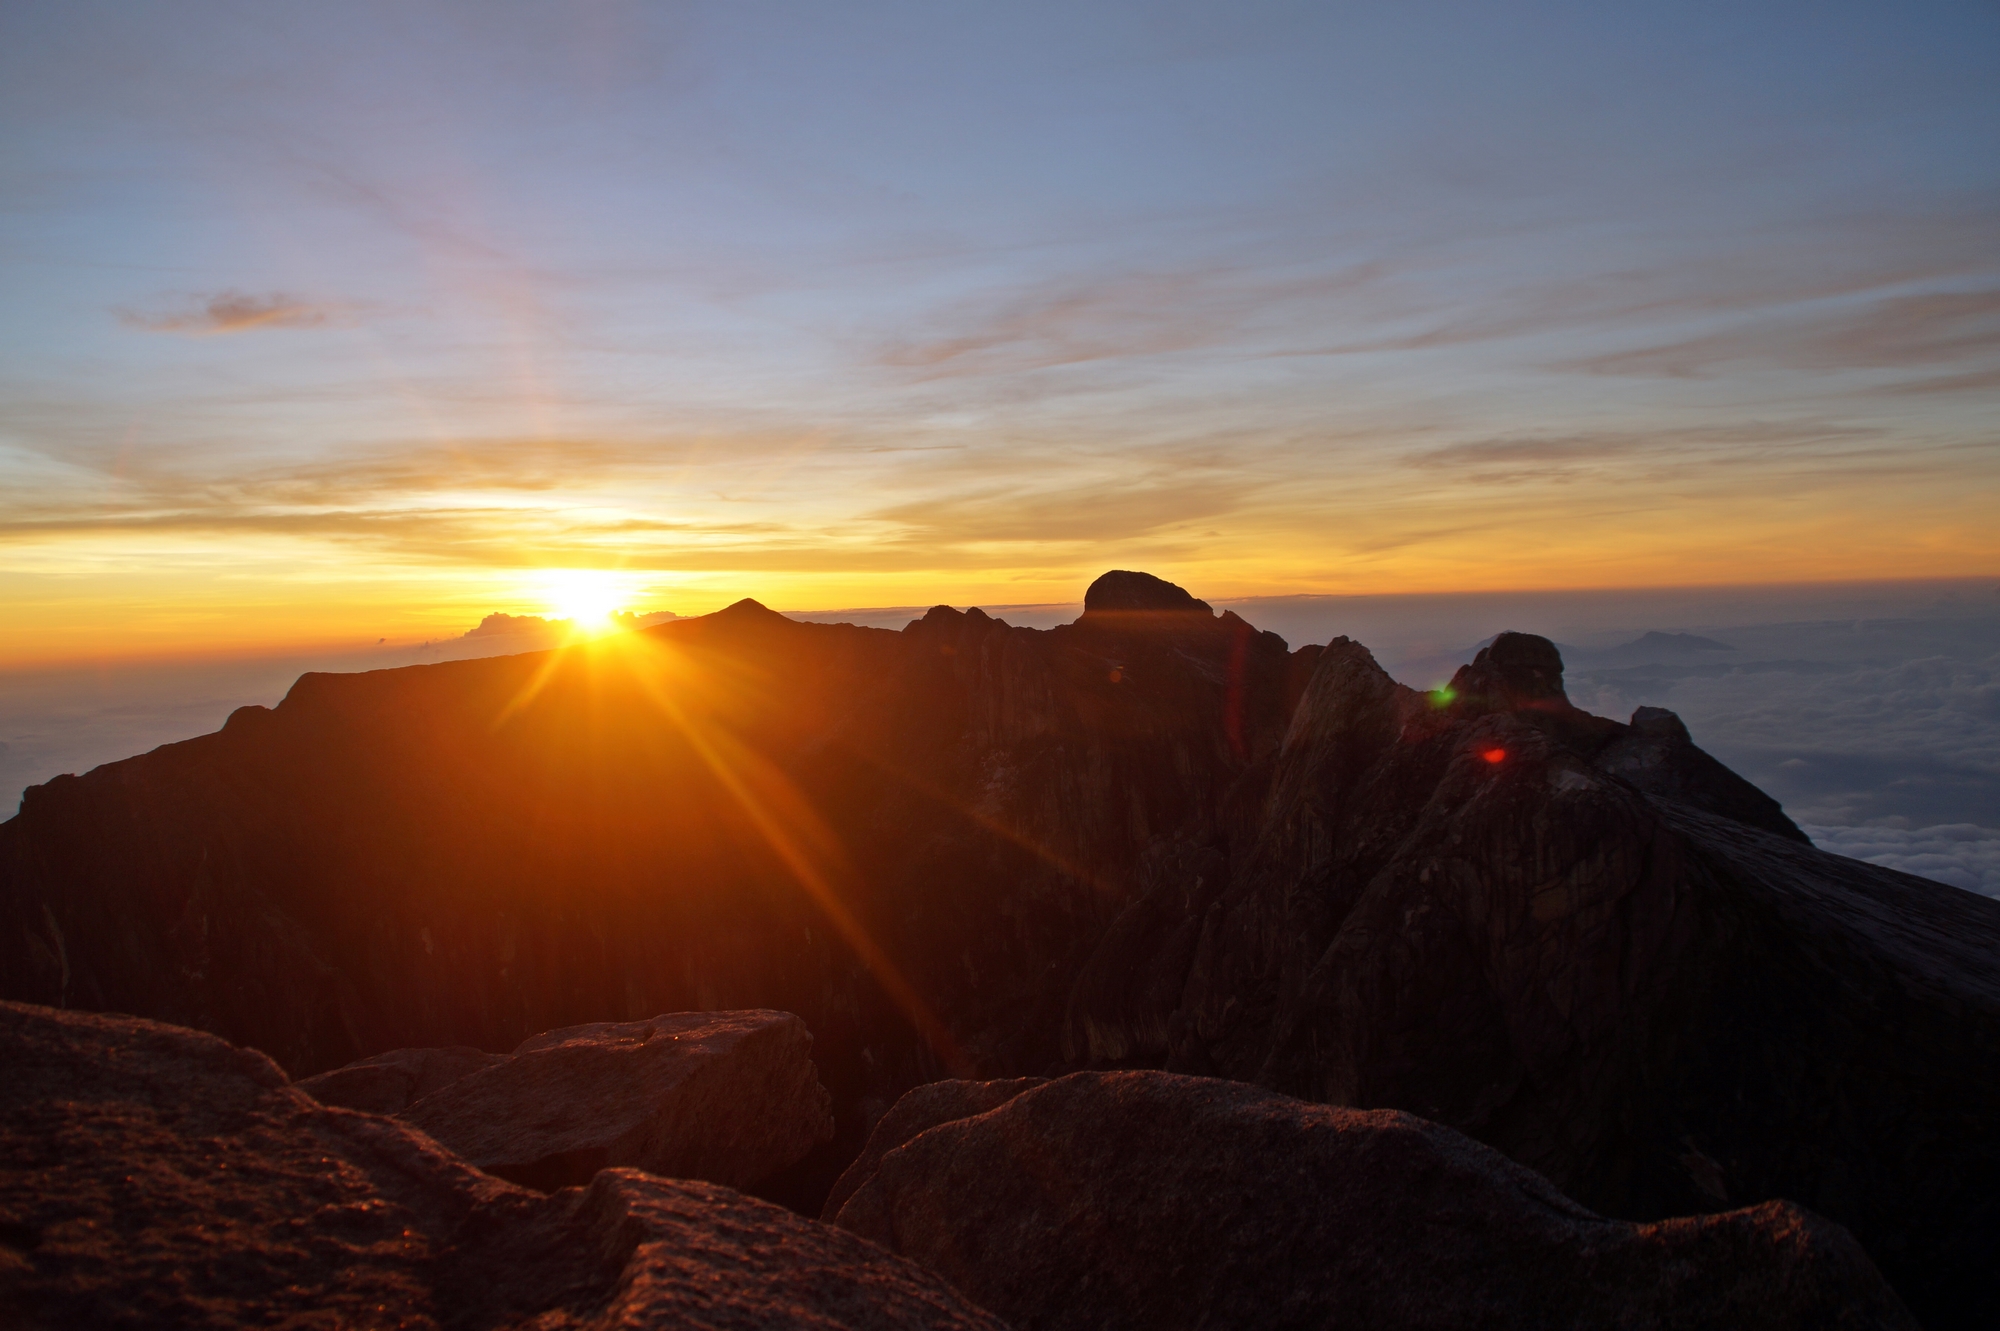 The sunrise on Mount Kinabalu, photographed just after we reached the top